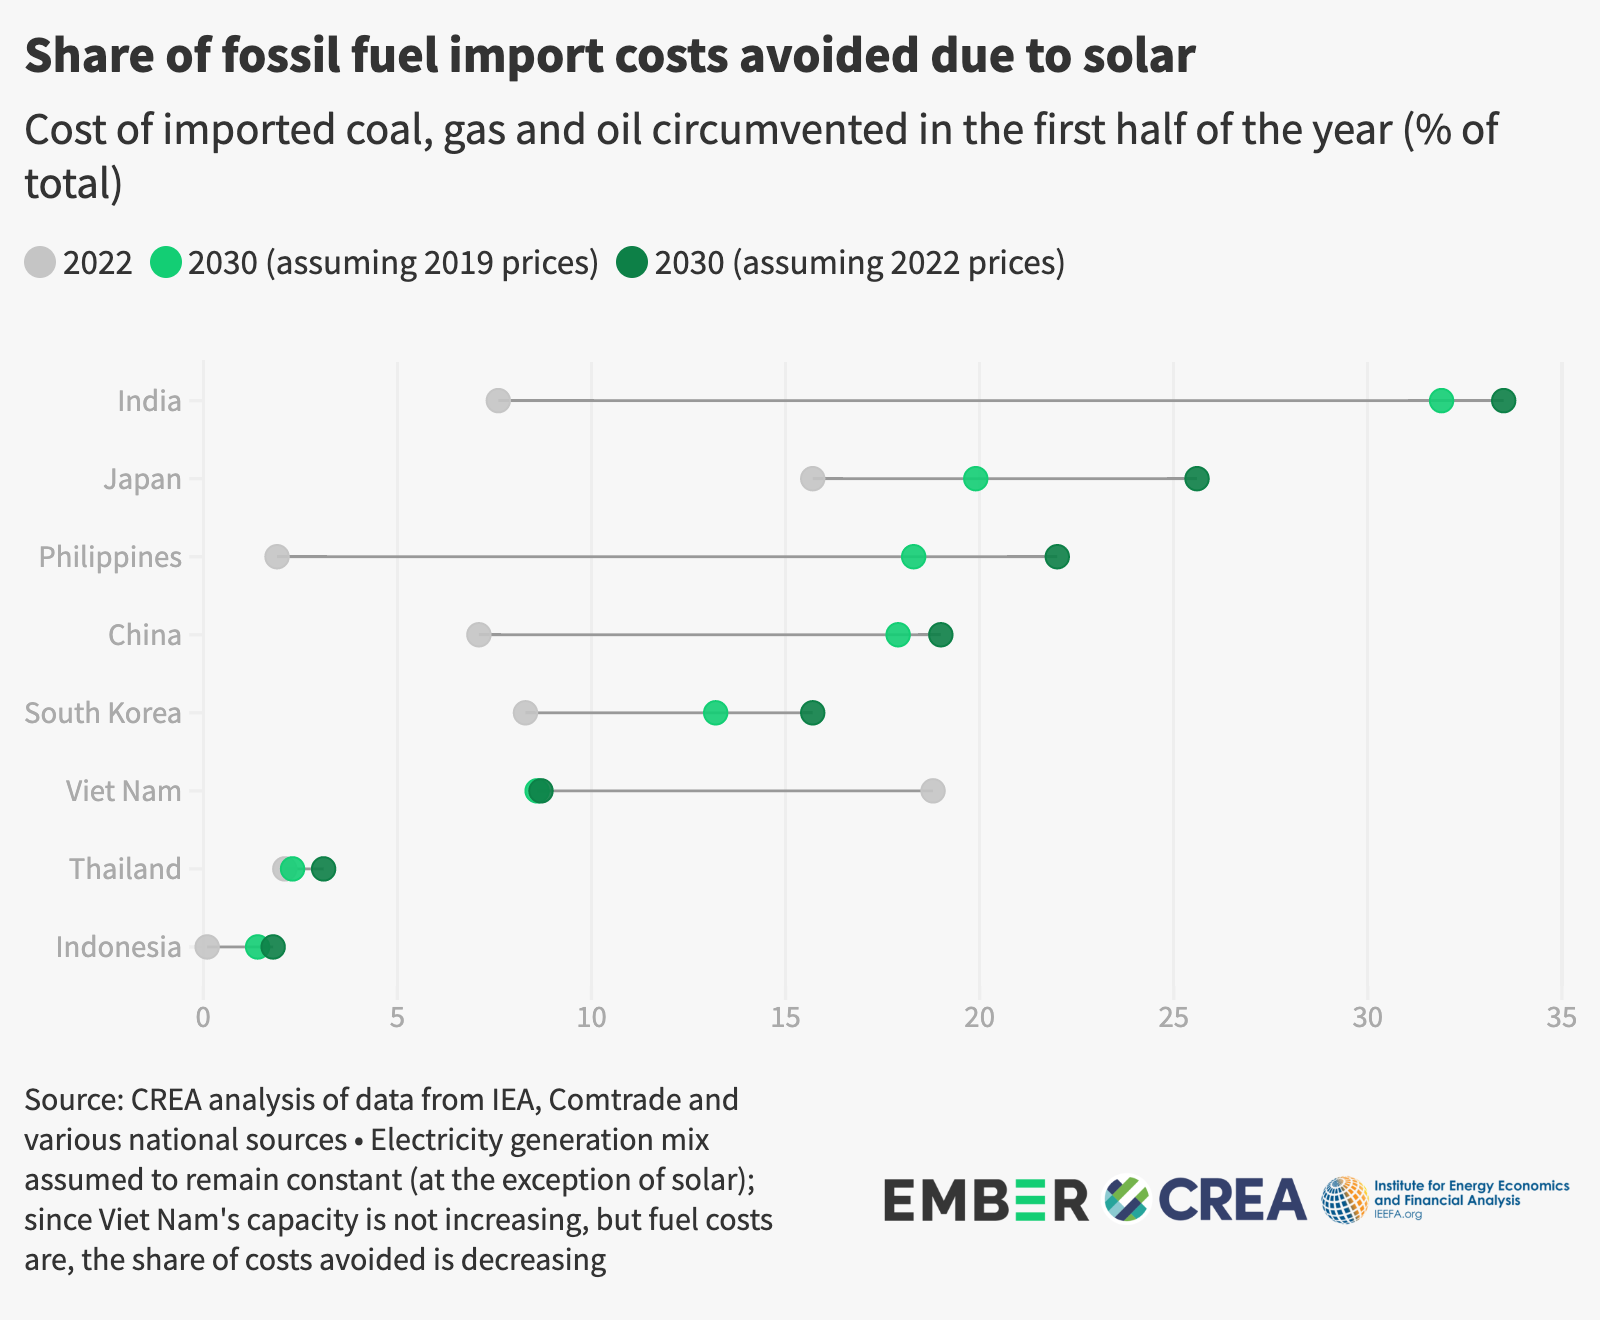 Seven key Asian countries avoided potential fossil fuel costs of approximately US$34 billion from January to June 2022.